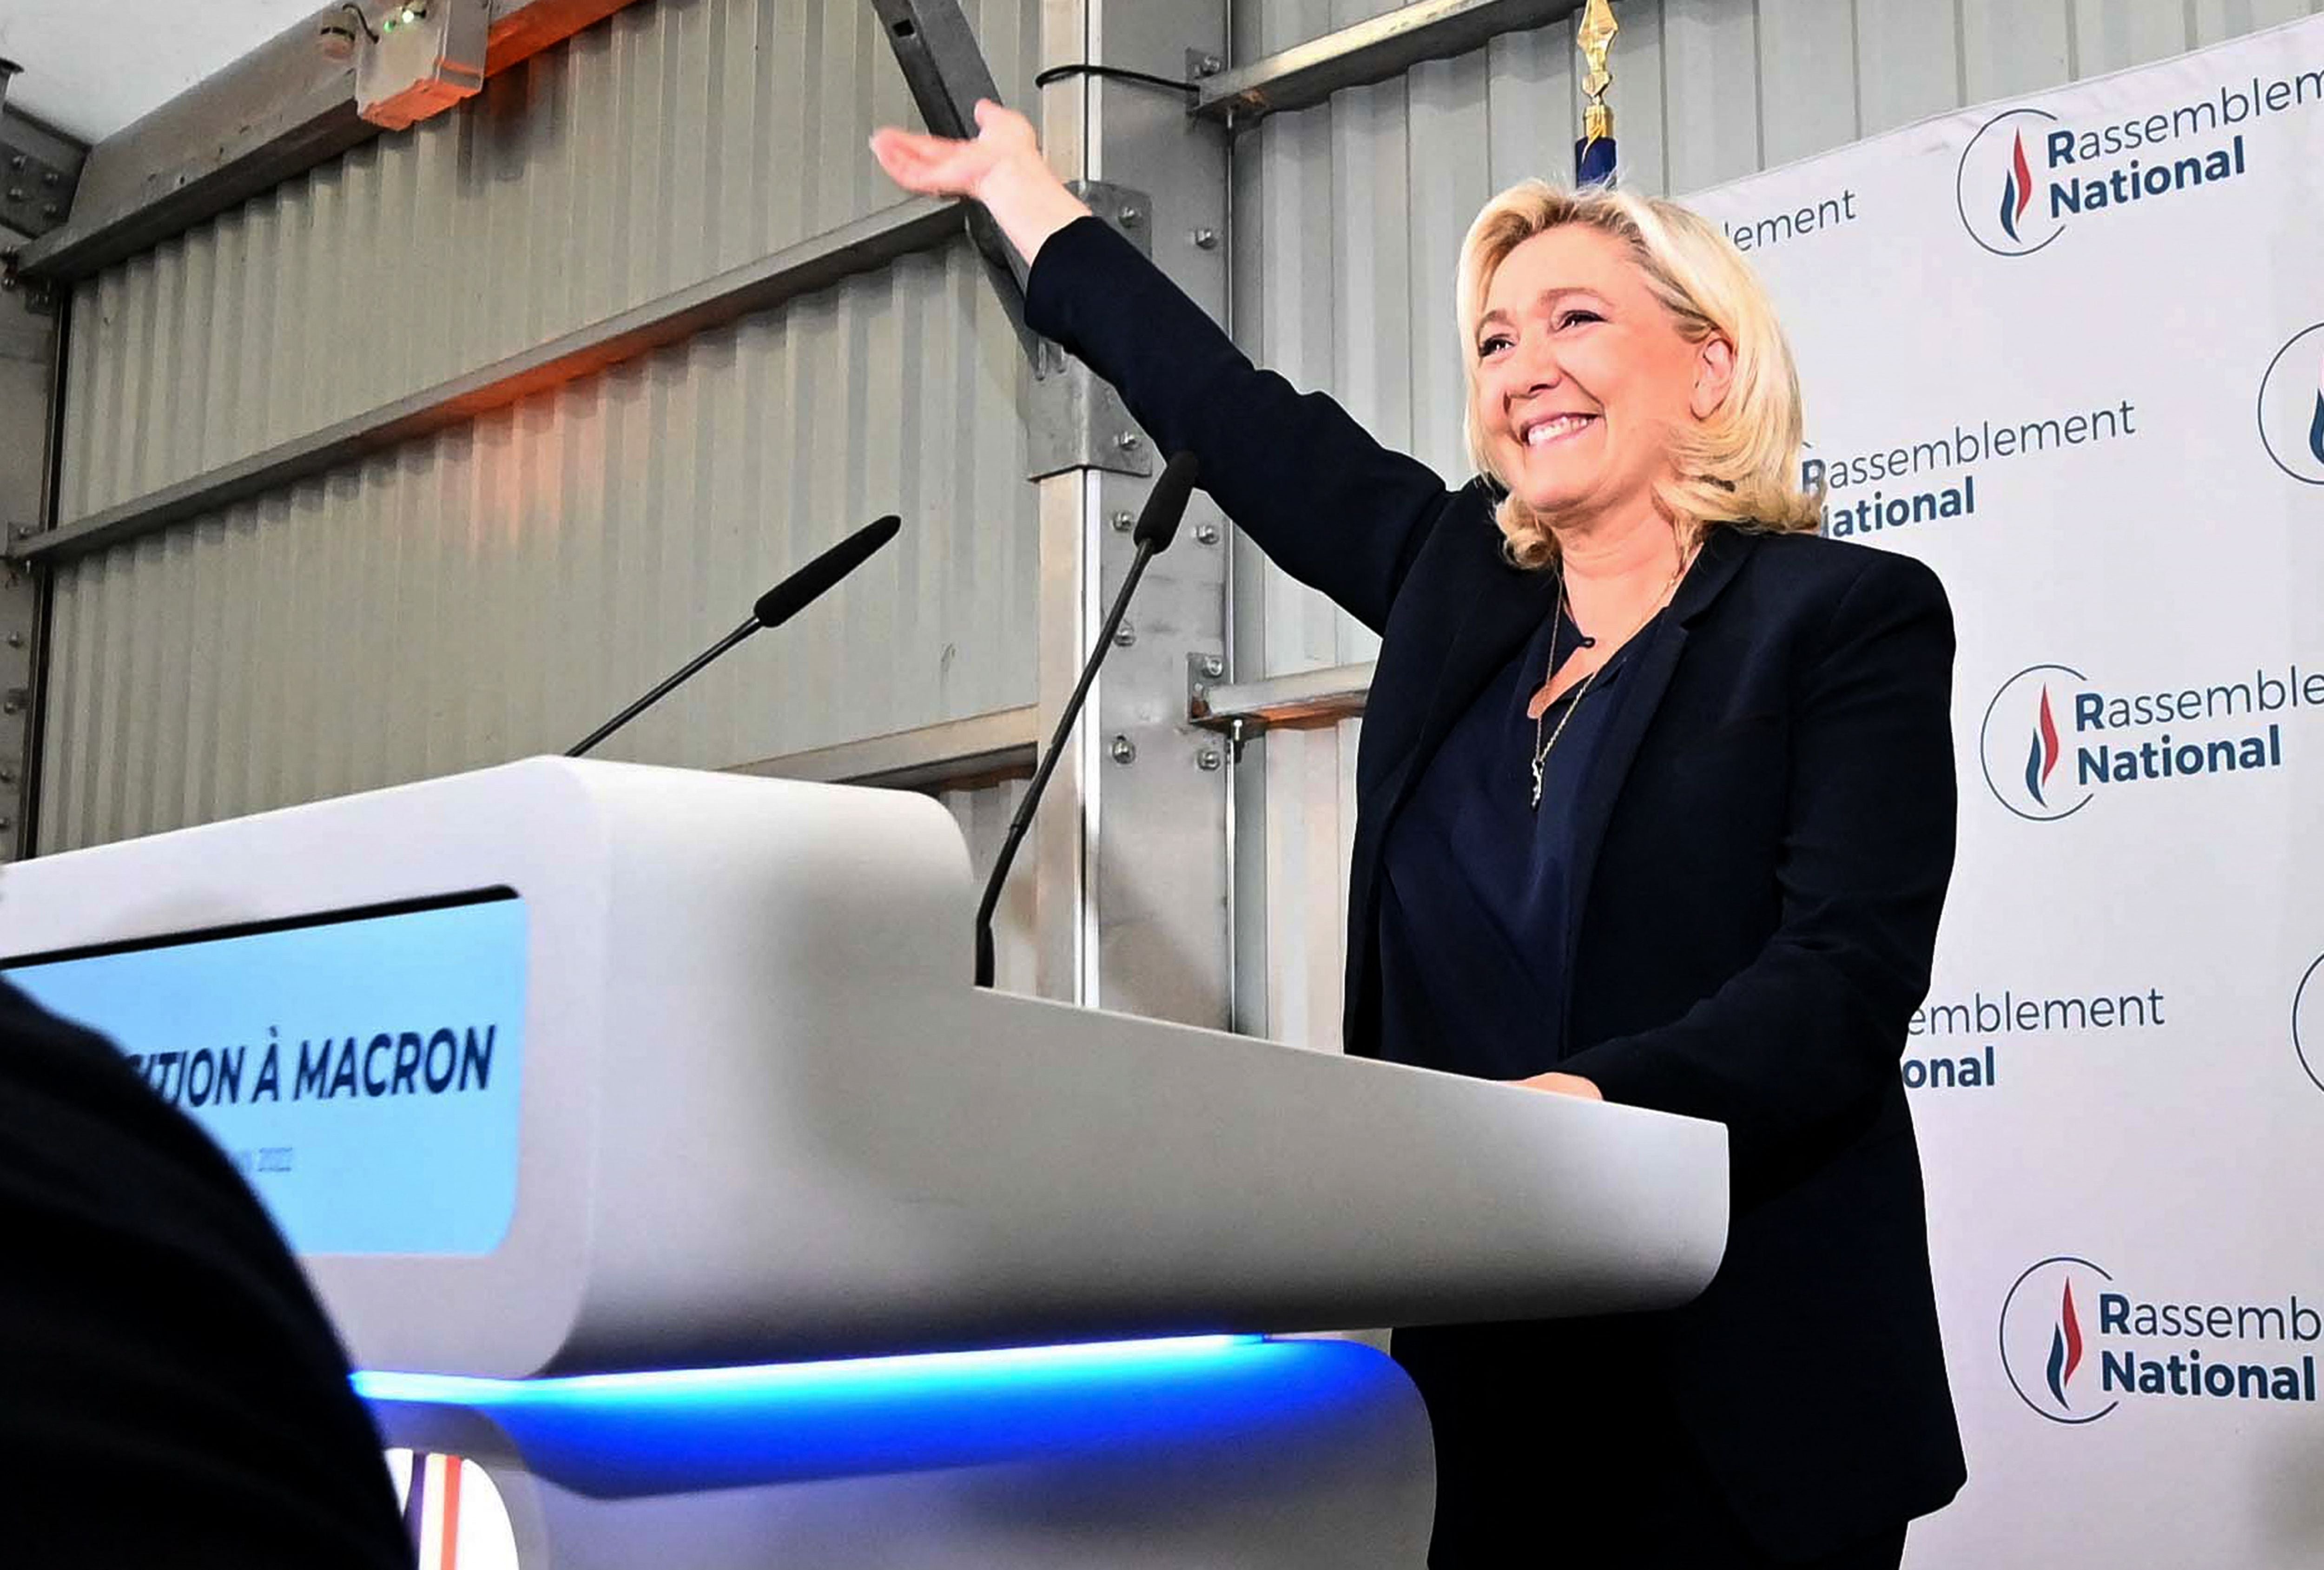 Rassemblement National (National Rally) leader Marine Le Pen celebrates Sunday’s parliamentary elections results in Henin-Beaumont, northern France